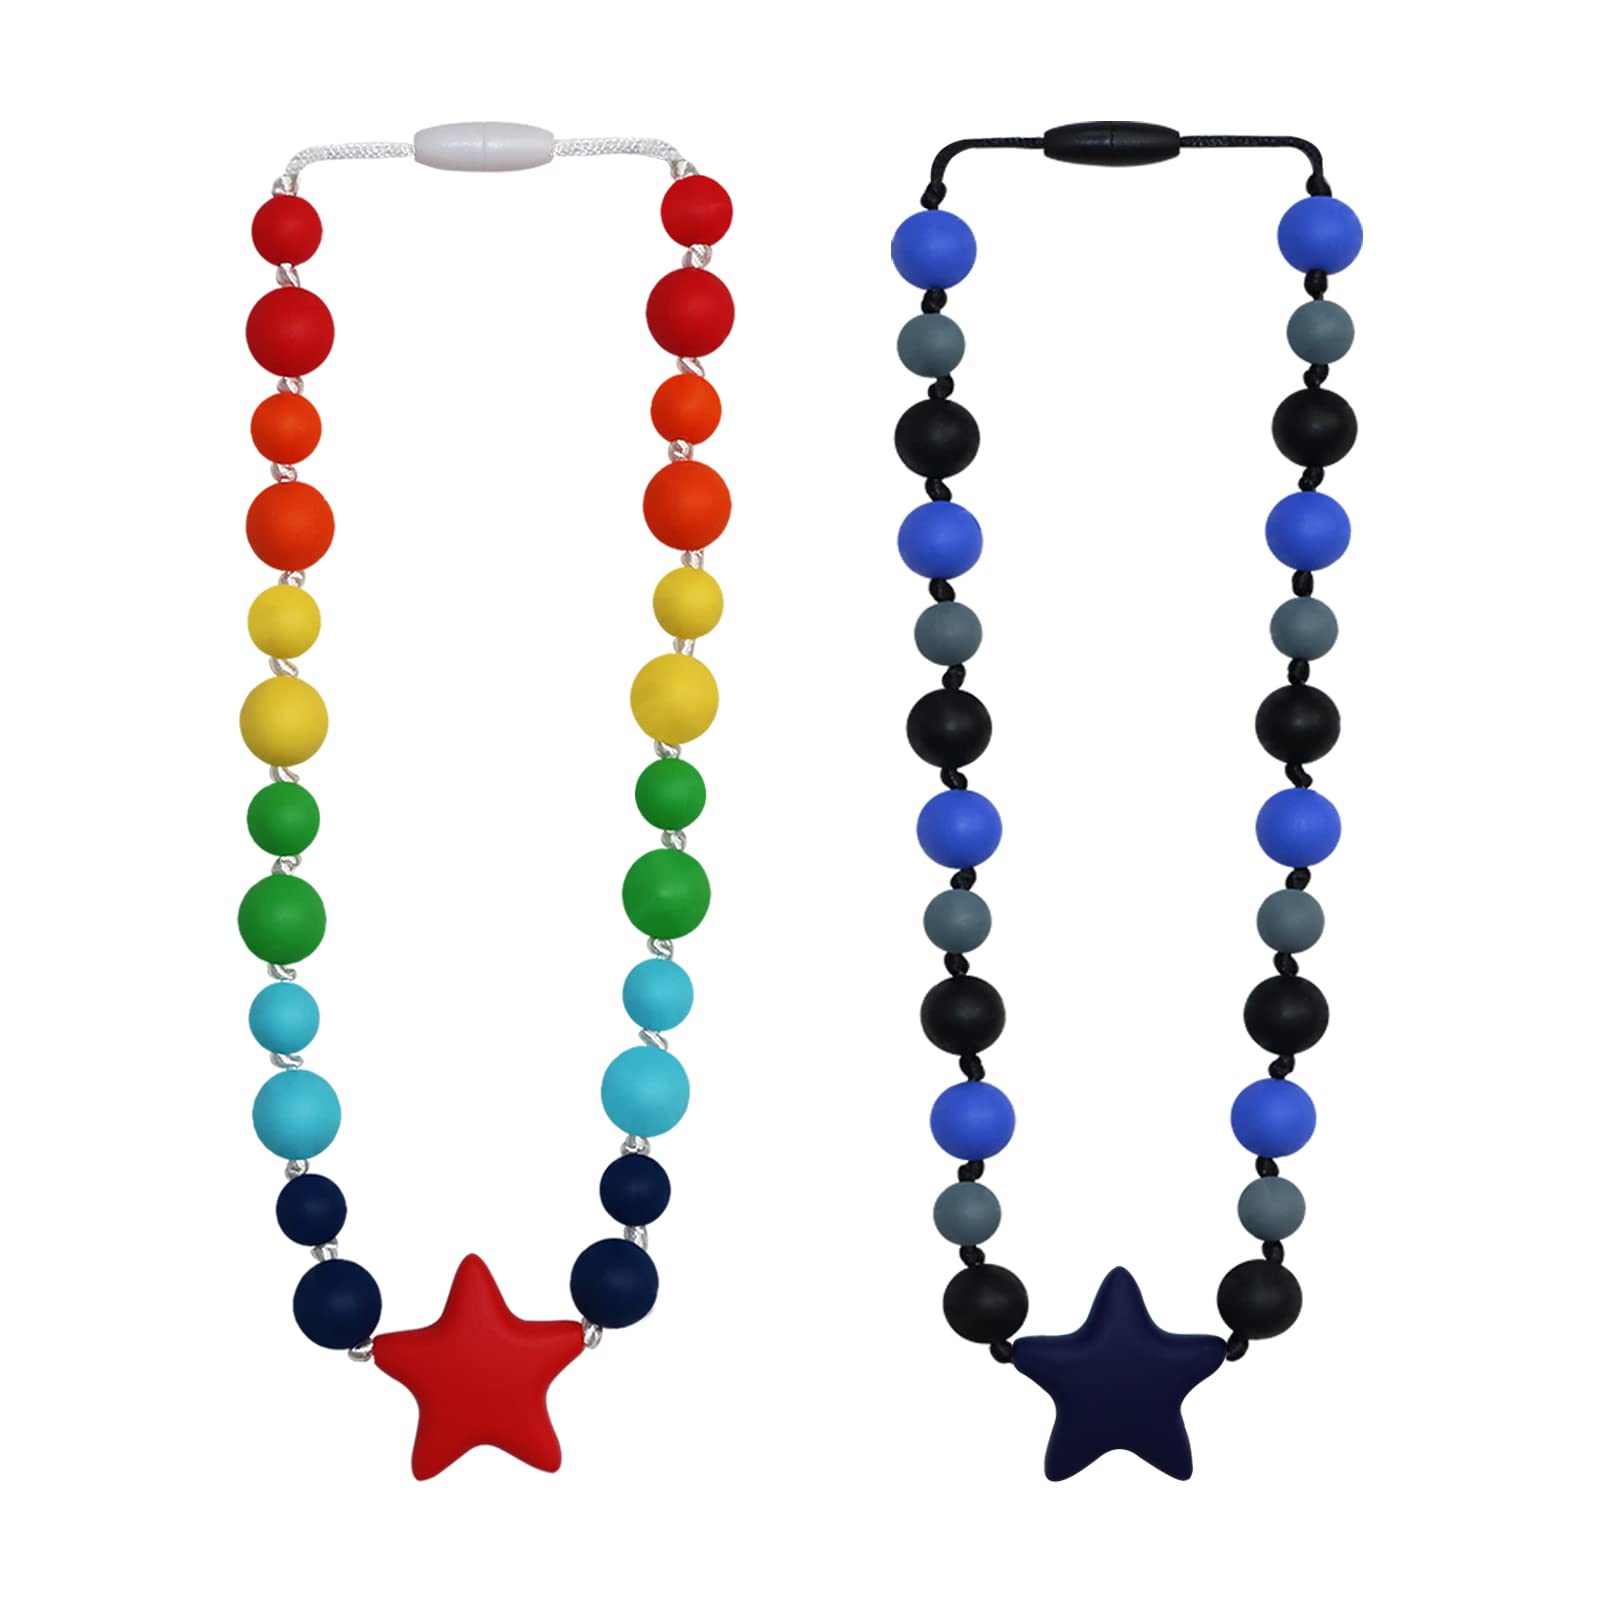 4 Pcs Food Grade Sensory Oral Motor Chew Necklace for ADHD,Autism,Biting  Needs | eBay